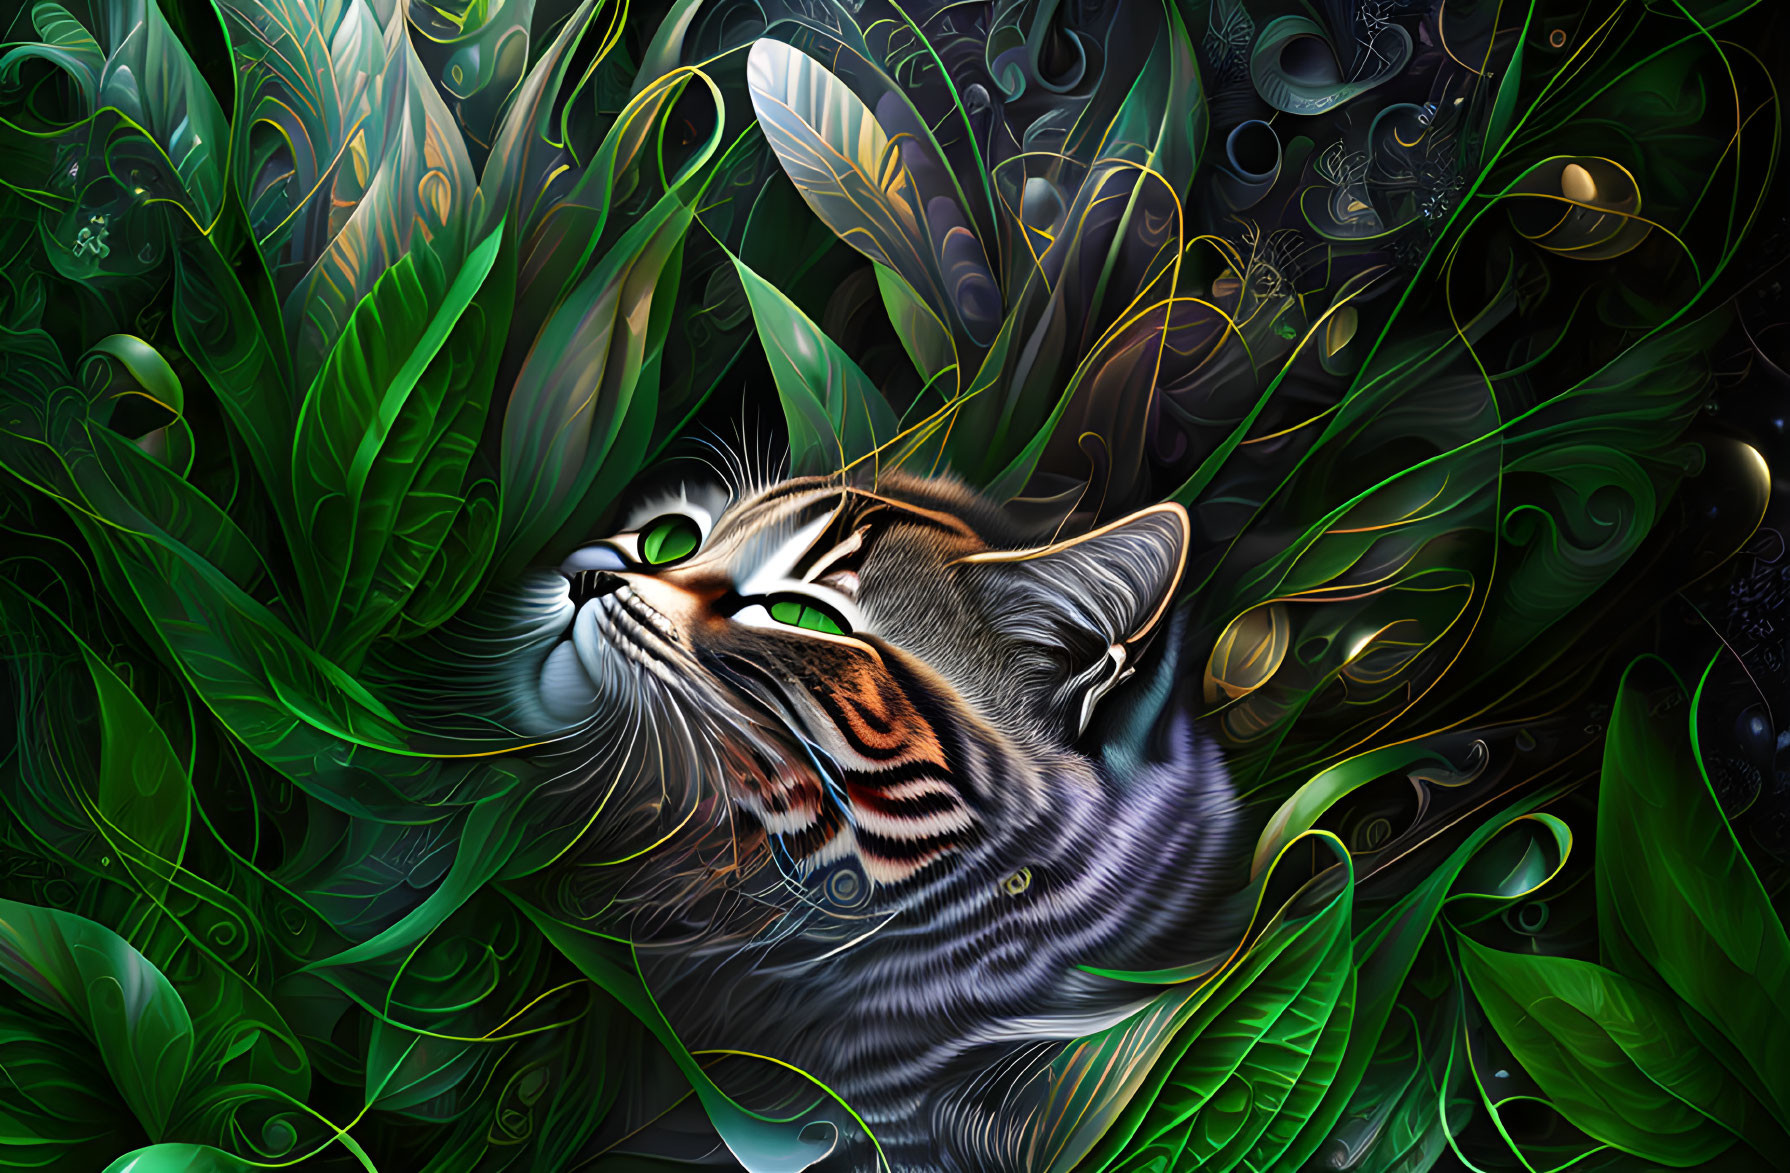 Striped cat with green eyes in vibrant green and black leaves and feathers